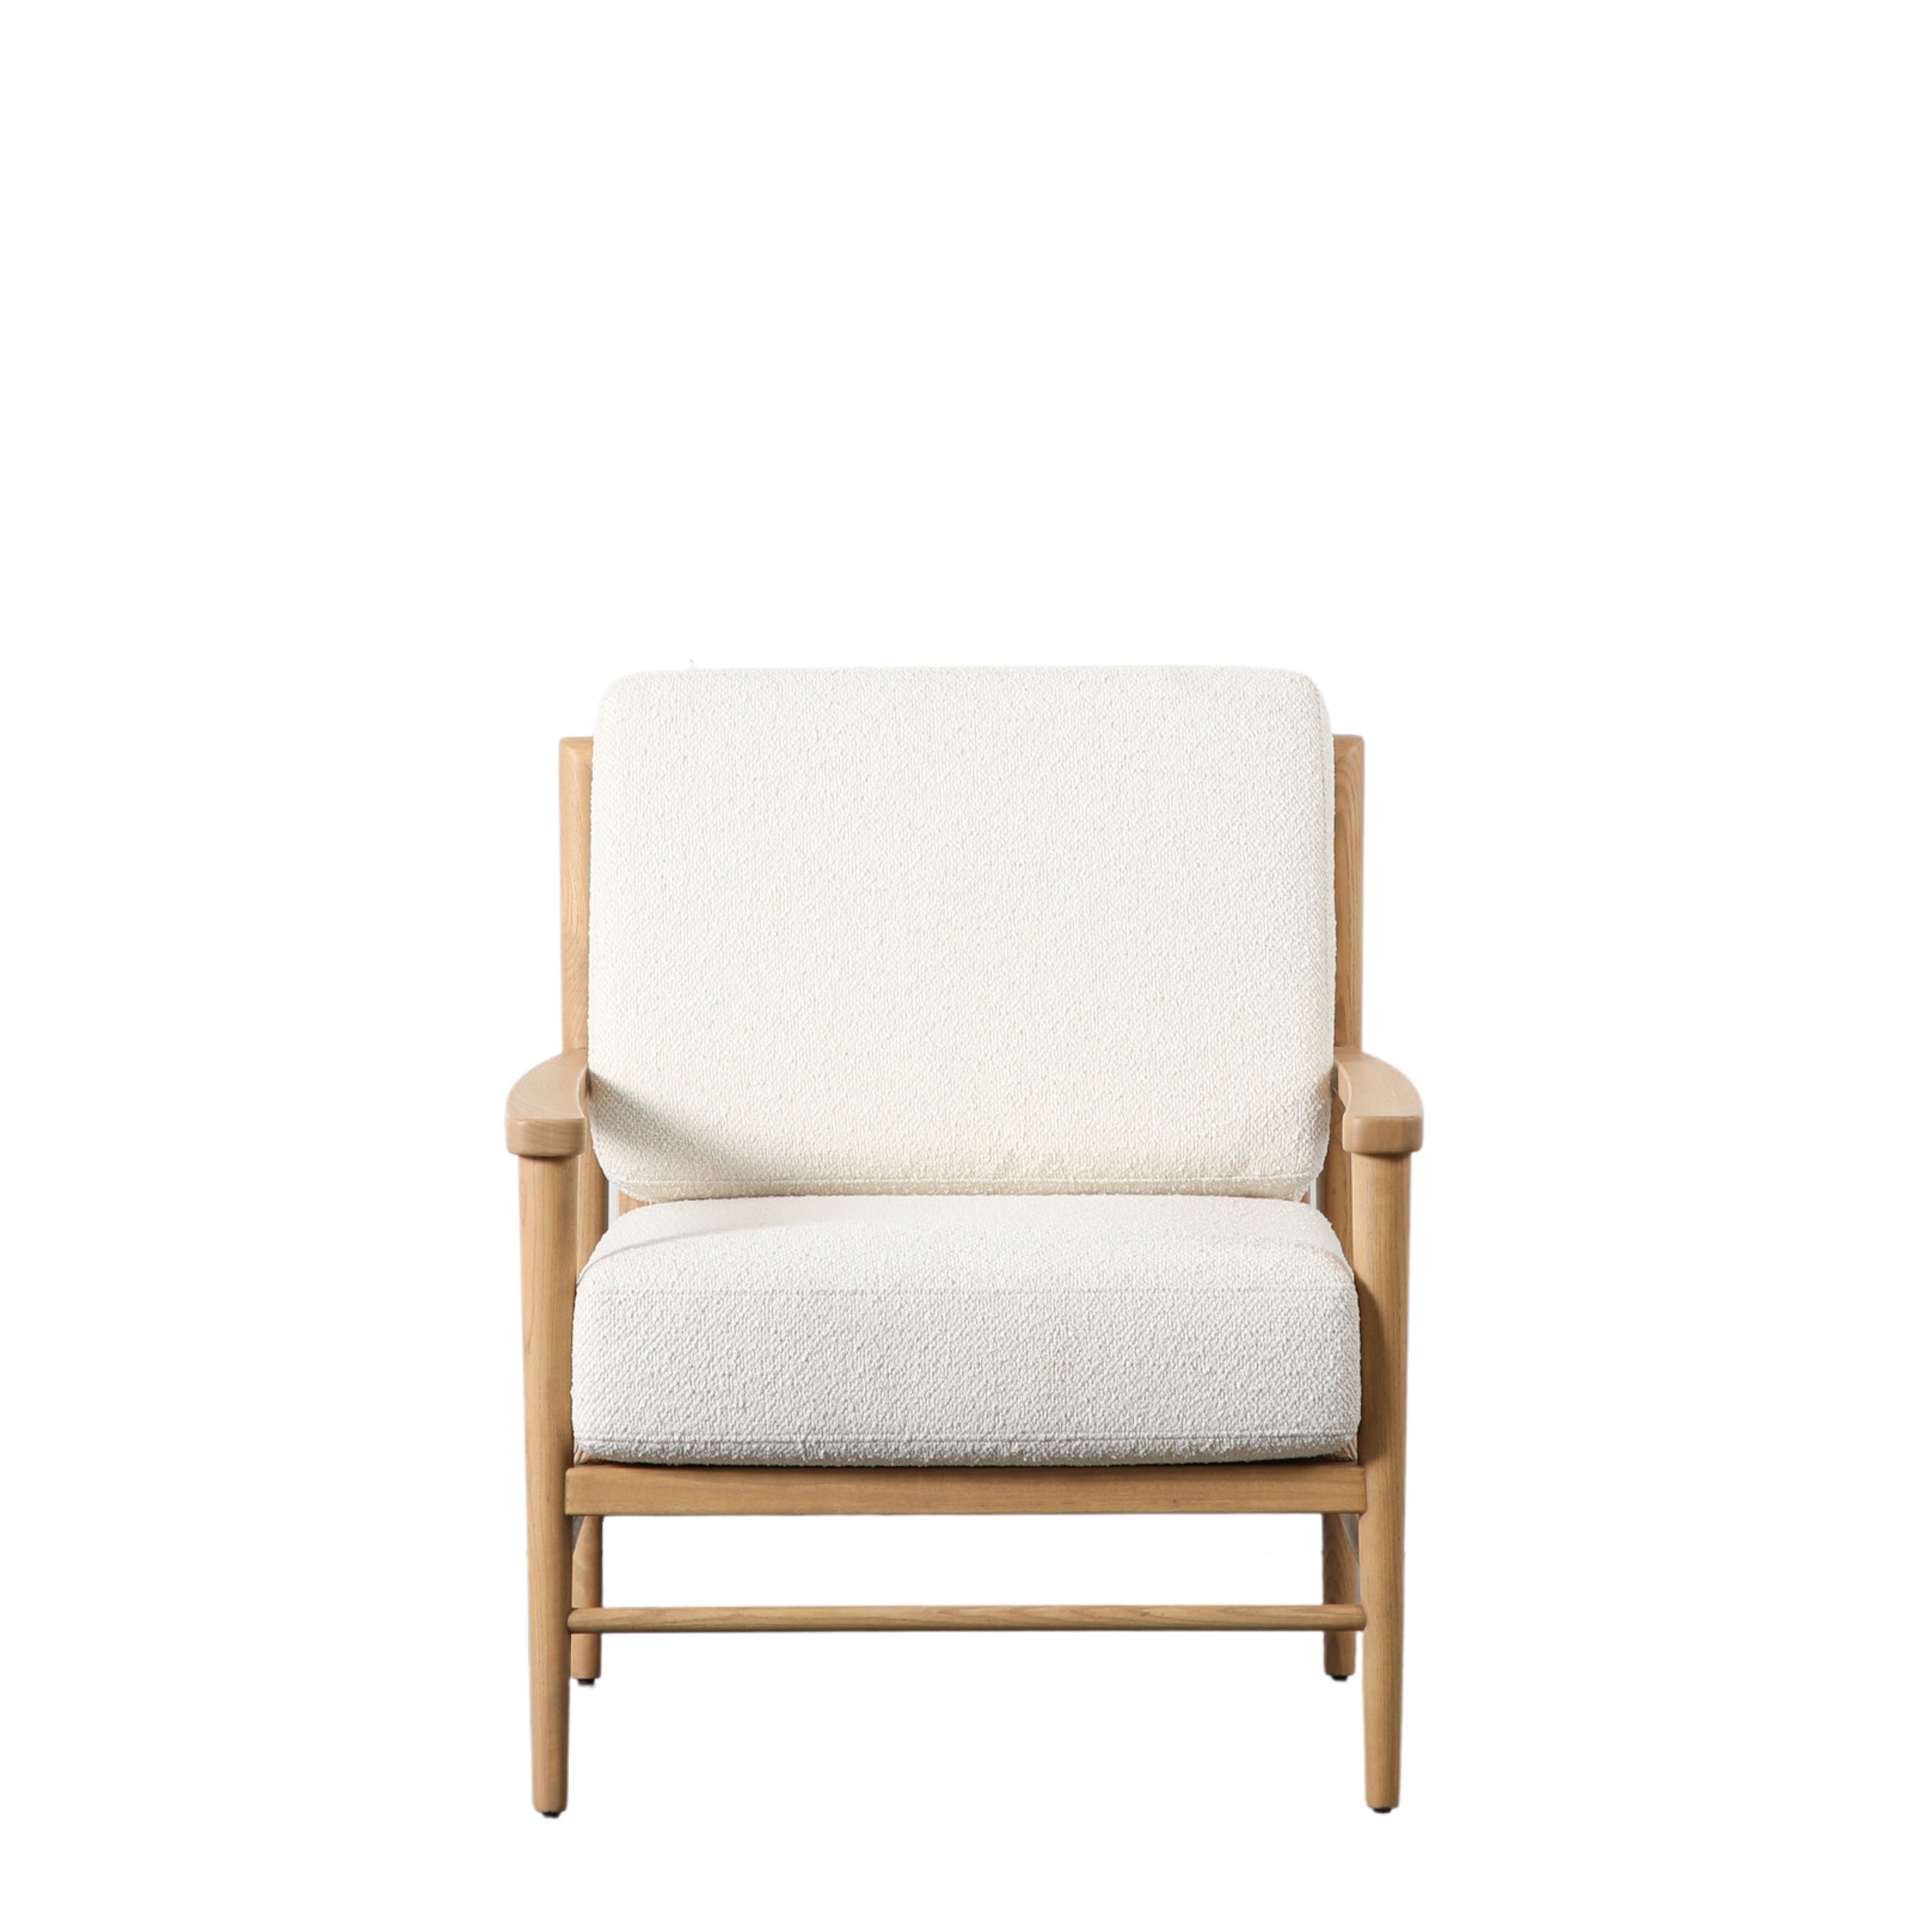 Kynance Oak Frame Armchair with Rattan and Natural Cushions